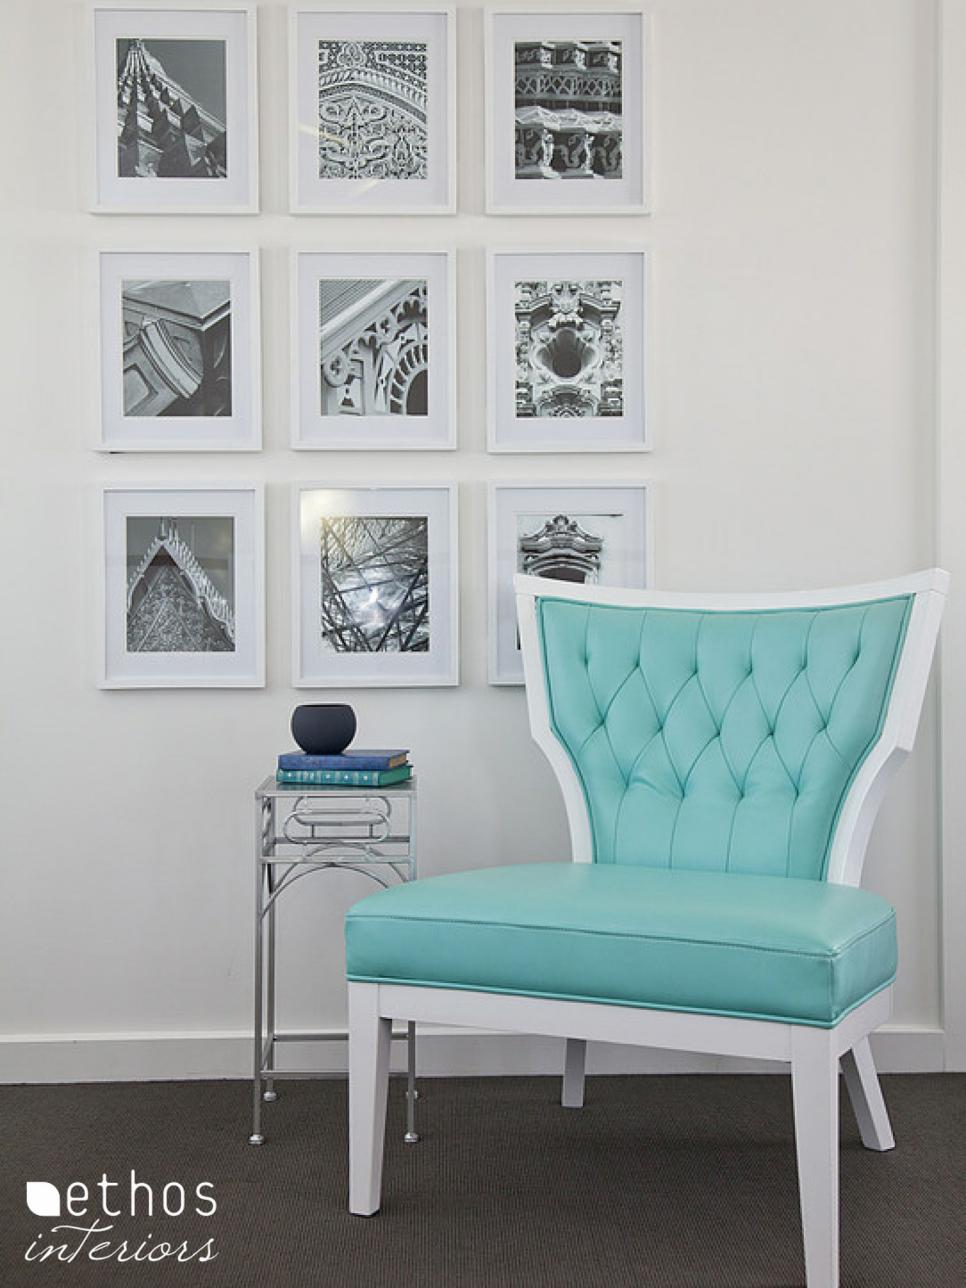 Bedroom Reading Nook With Turquoise Chair and Gallery Wall